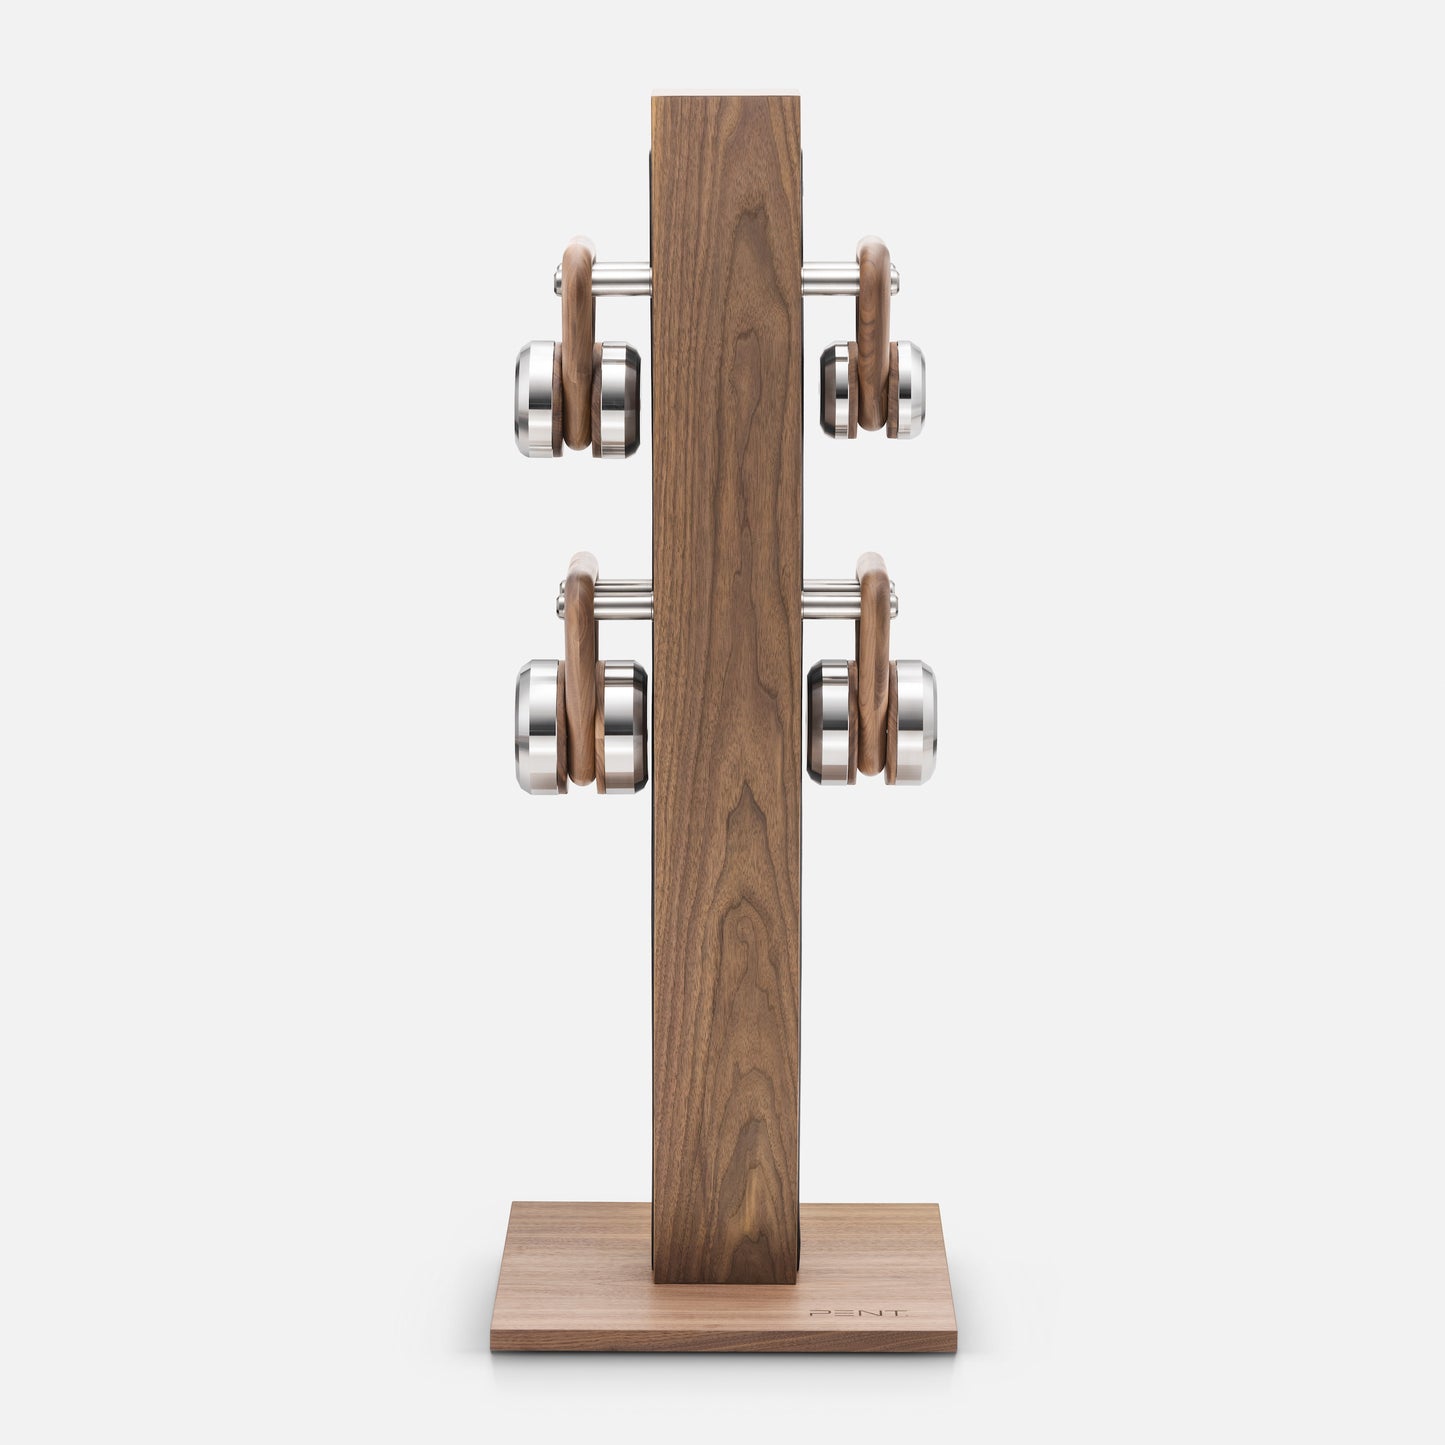 PENT Lova Luxury Kettlebells on a vertical stand, featuring customisable options in various weight ranges, wood types, and leather combinations.